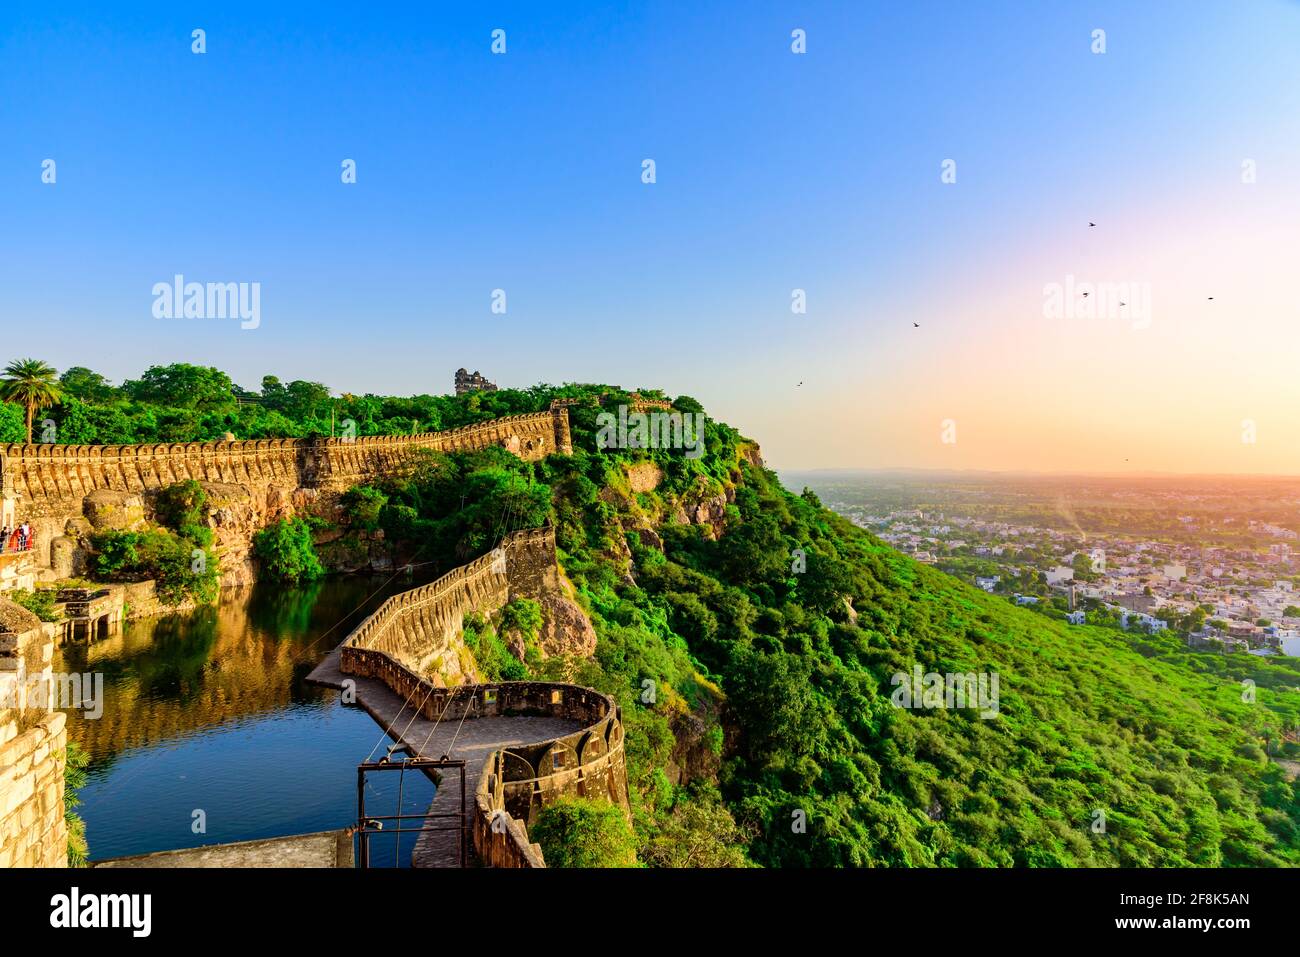 View during sunset from Chittor or Chittorgarh Fort with city in backdrop. It is one of the largest forts in India &  listed in the UNESCO World Herit Stock Photo